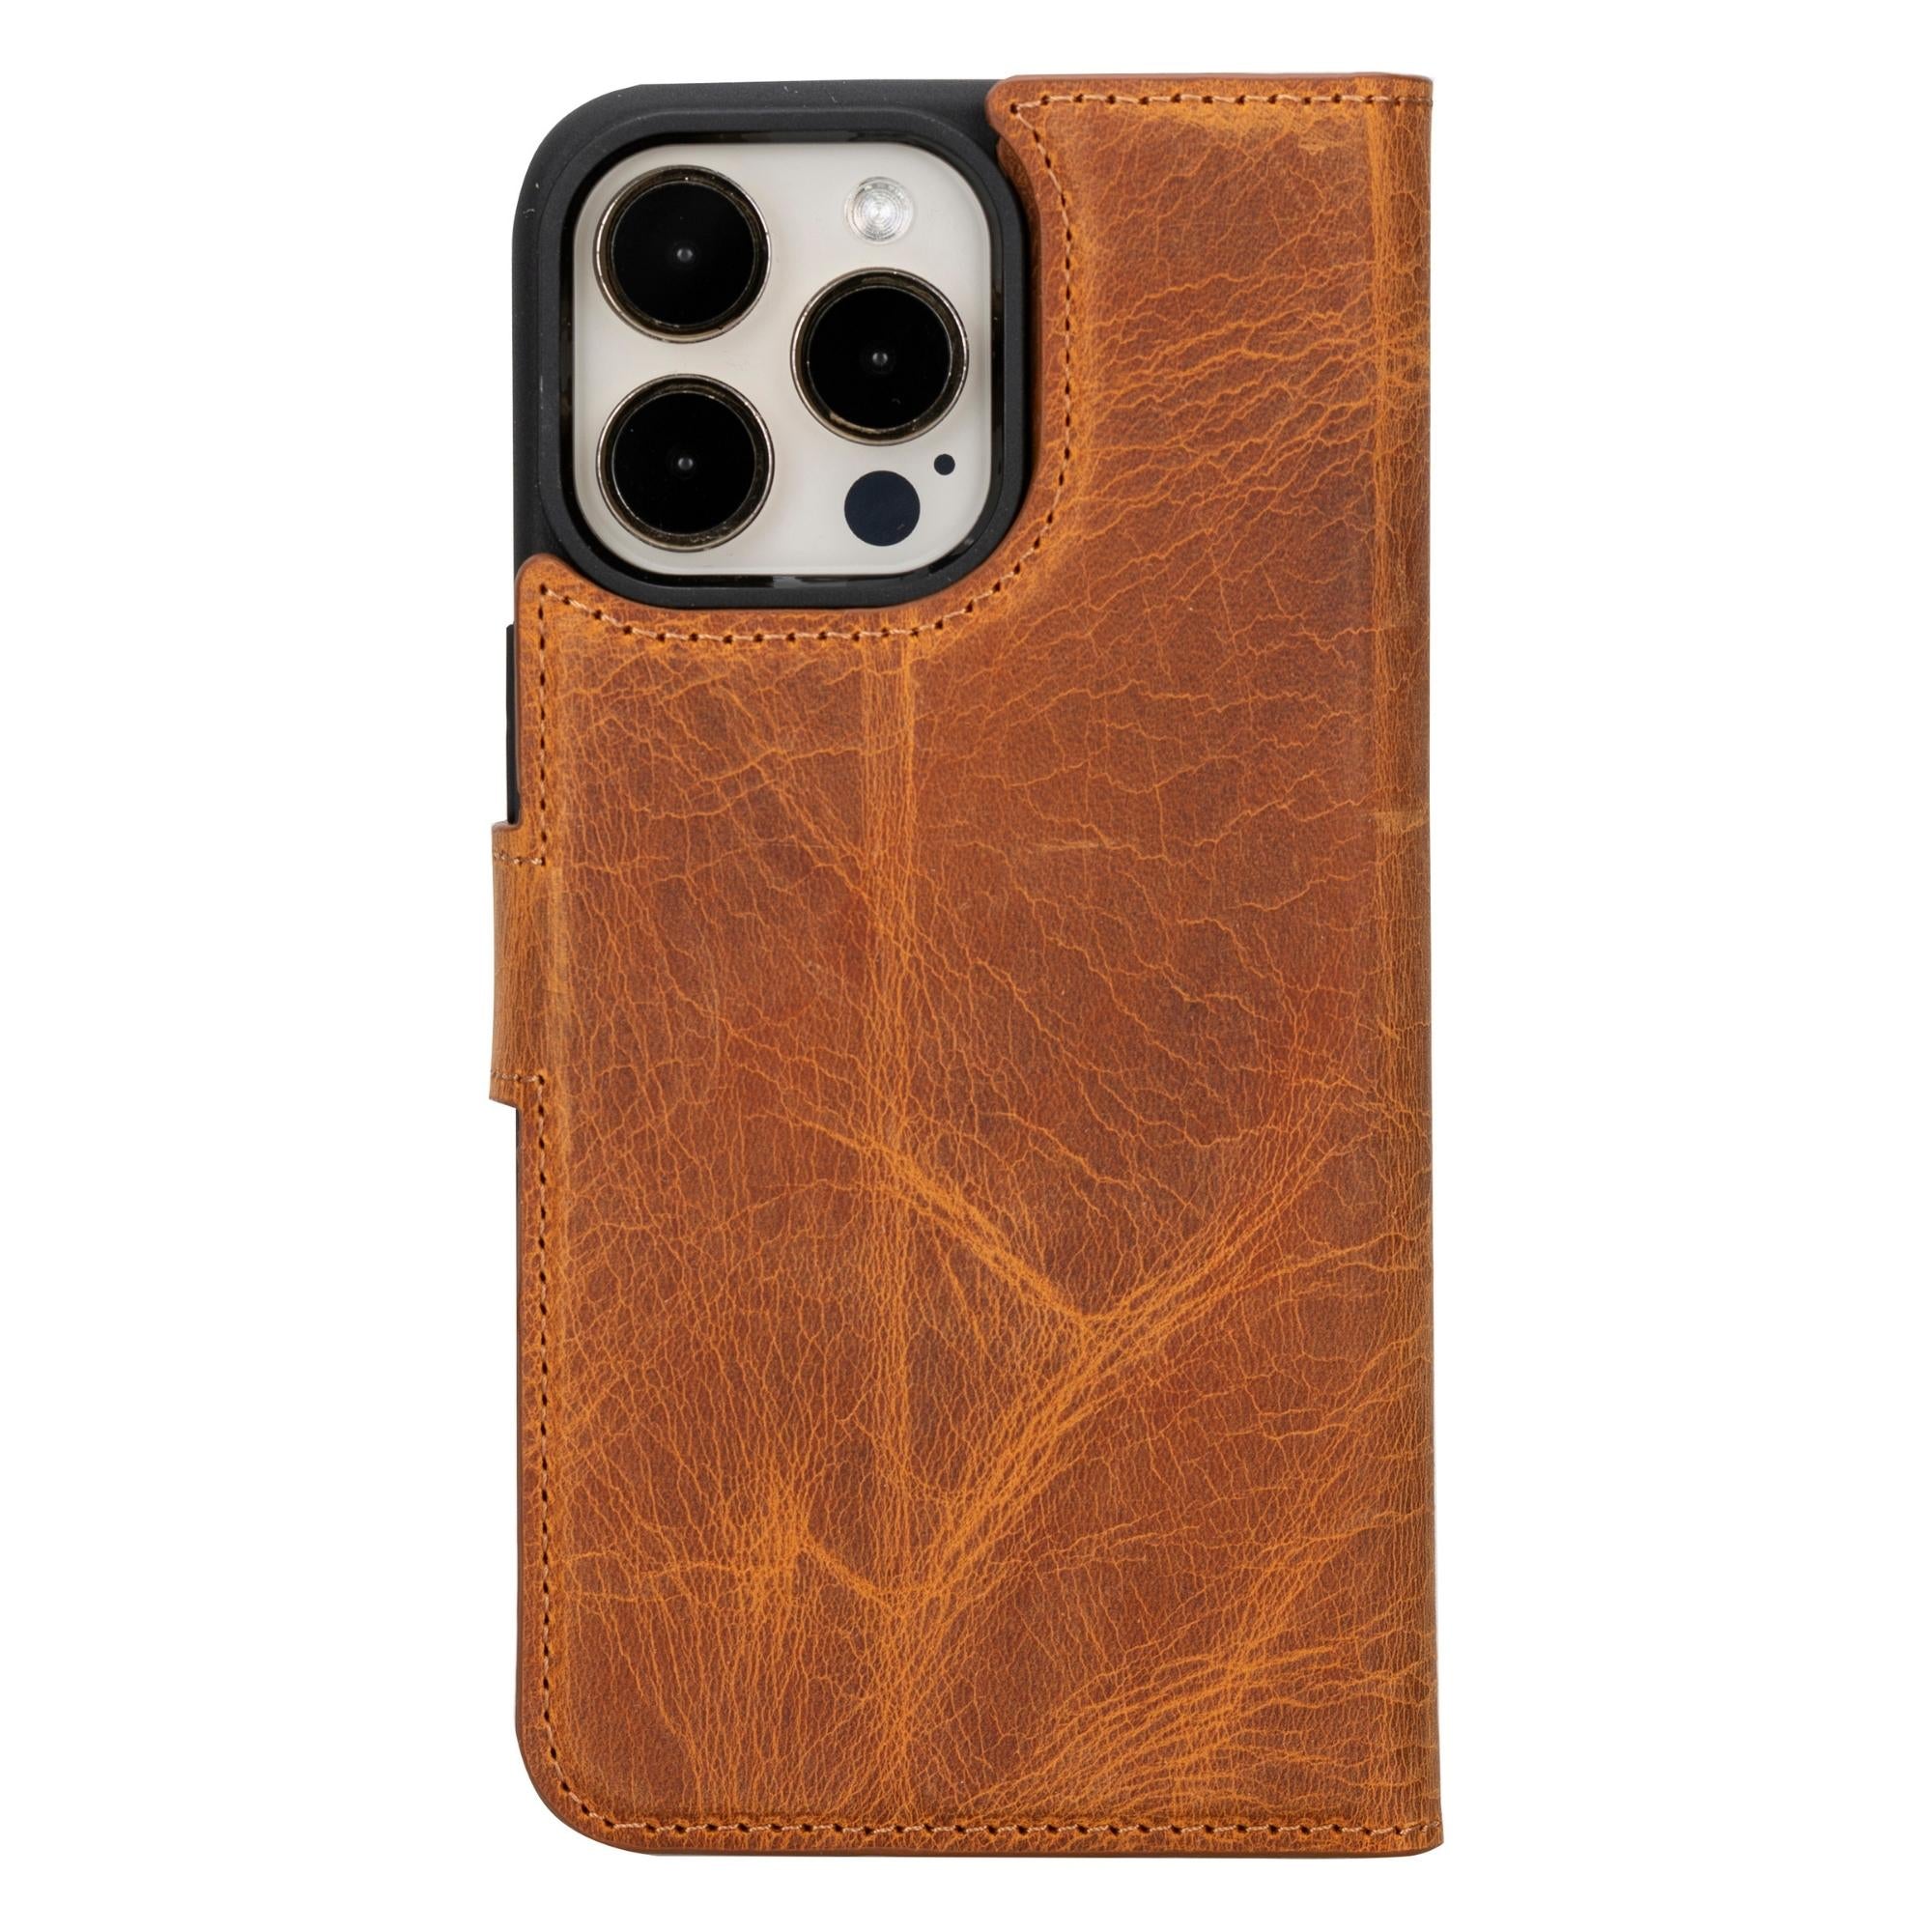 Handmade Genuine Leather Wallet Case For Iphone 15 Pro Max Case For Iphone  14 Pro / 13 Pro With Wristlet Brown Iphone 12 11 mini Italian :  : Handmade Products